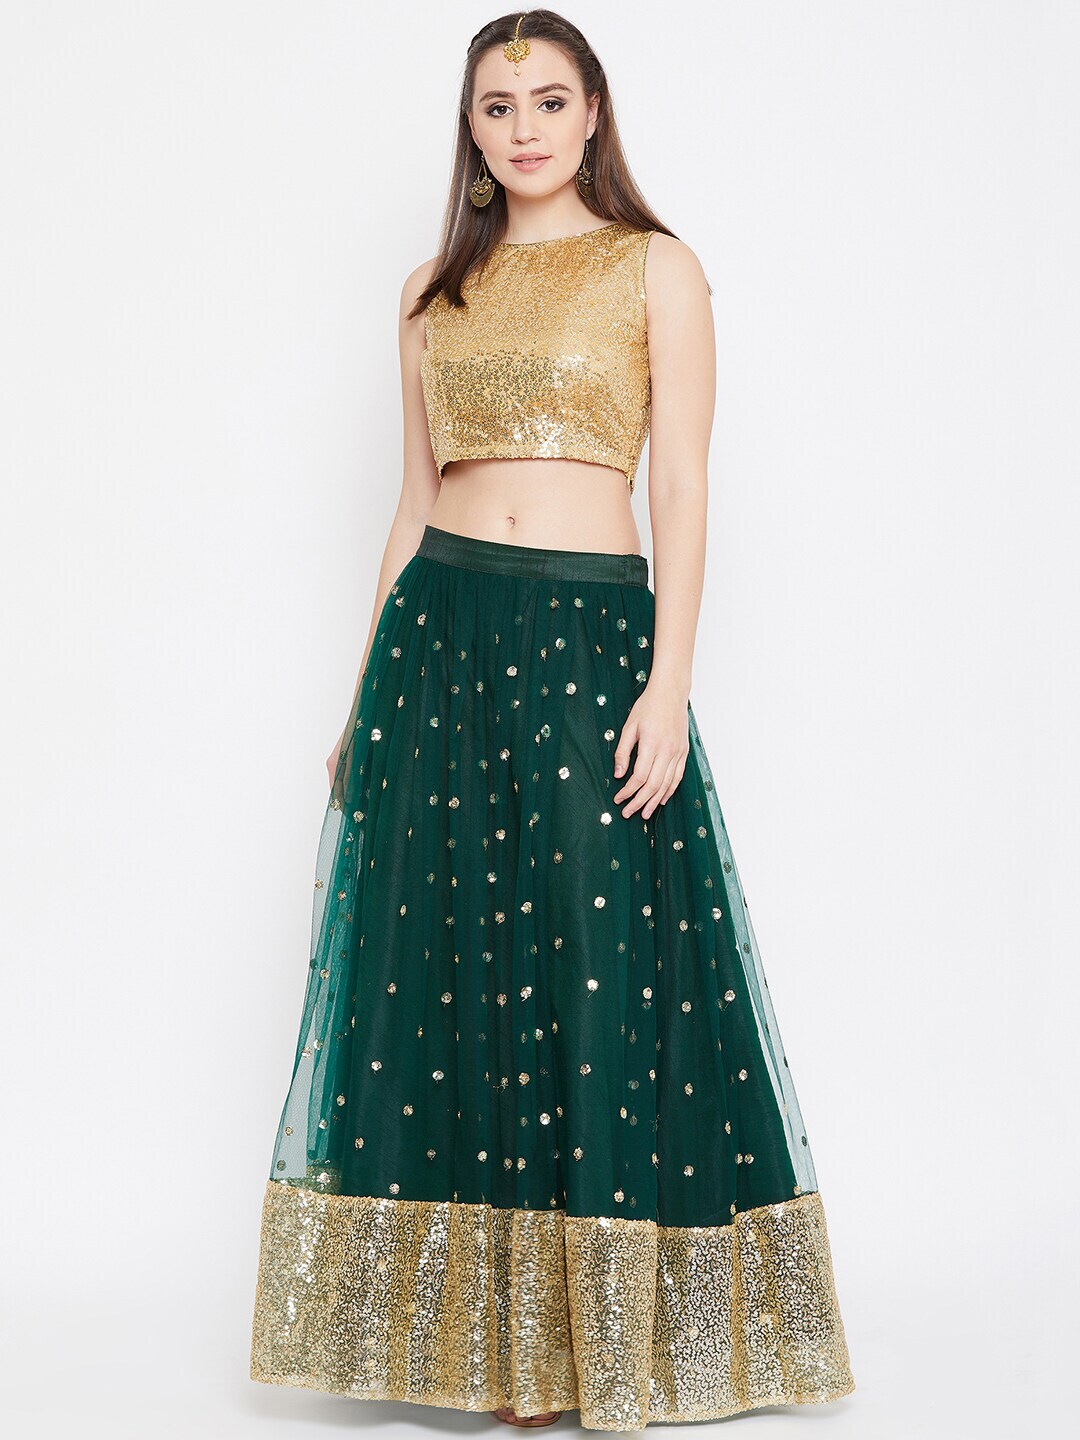 studio rasa Women Green & Gold-Toned Ready to Wear Embellished Lehenga with Blouse Price in India